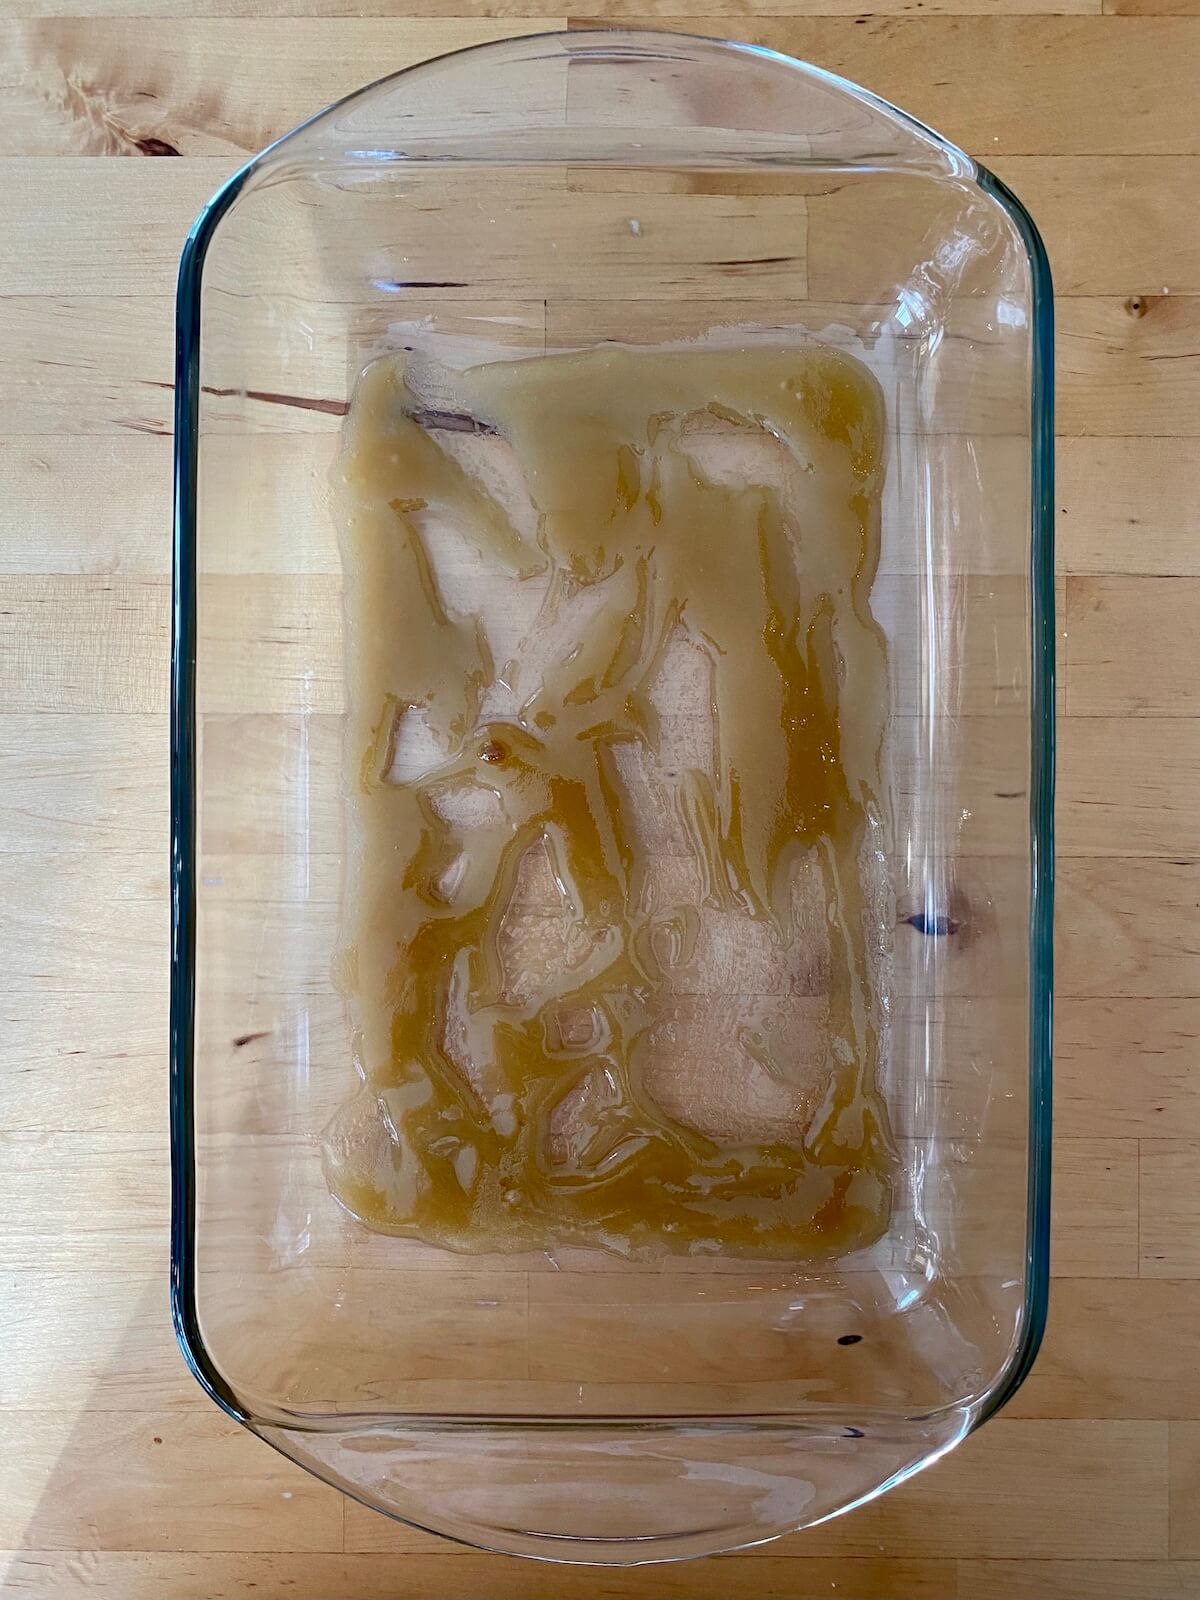 A mixture of melted butter and brown sugar spread on the bottom of a glass baking dish.